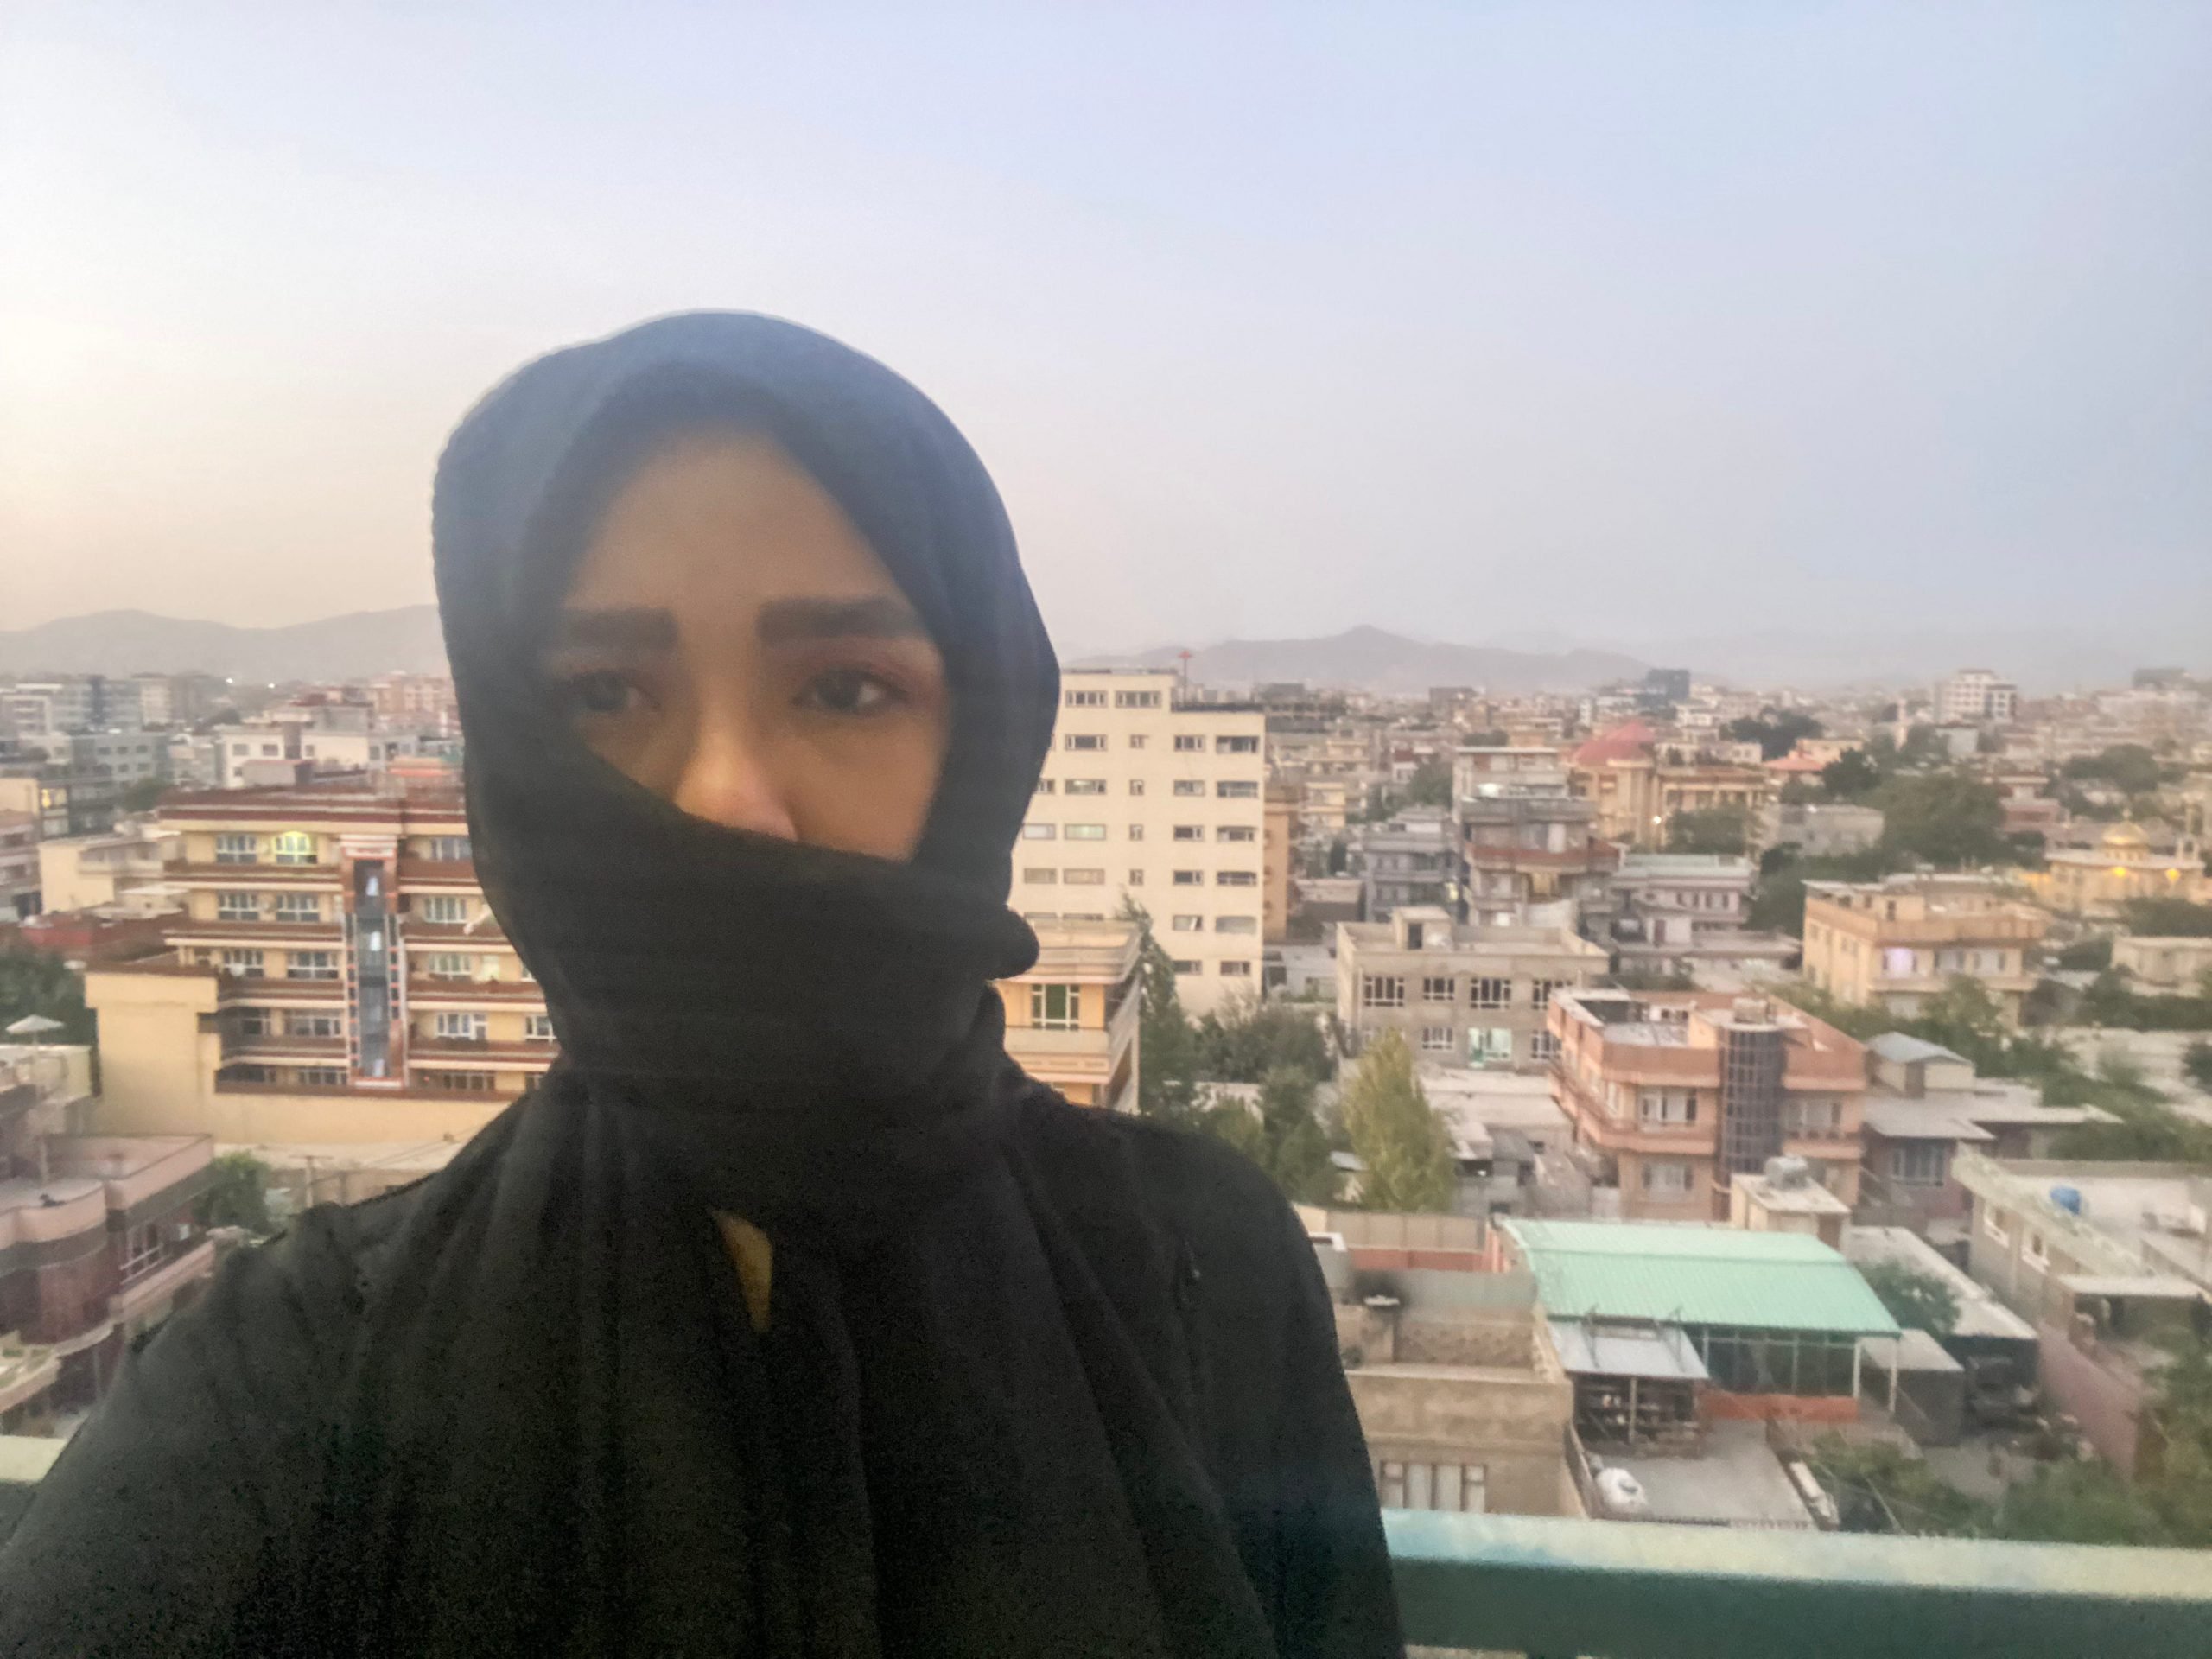 A woman, dressed in a black covering, poses in front of the Kabul skyline.